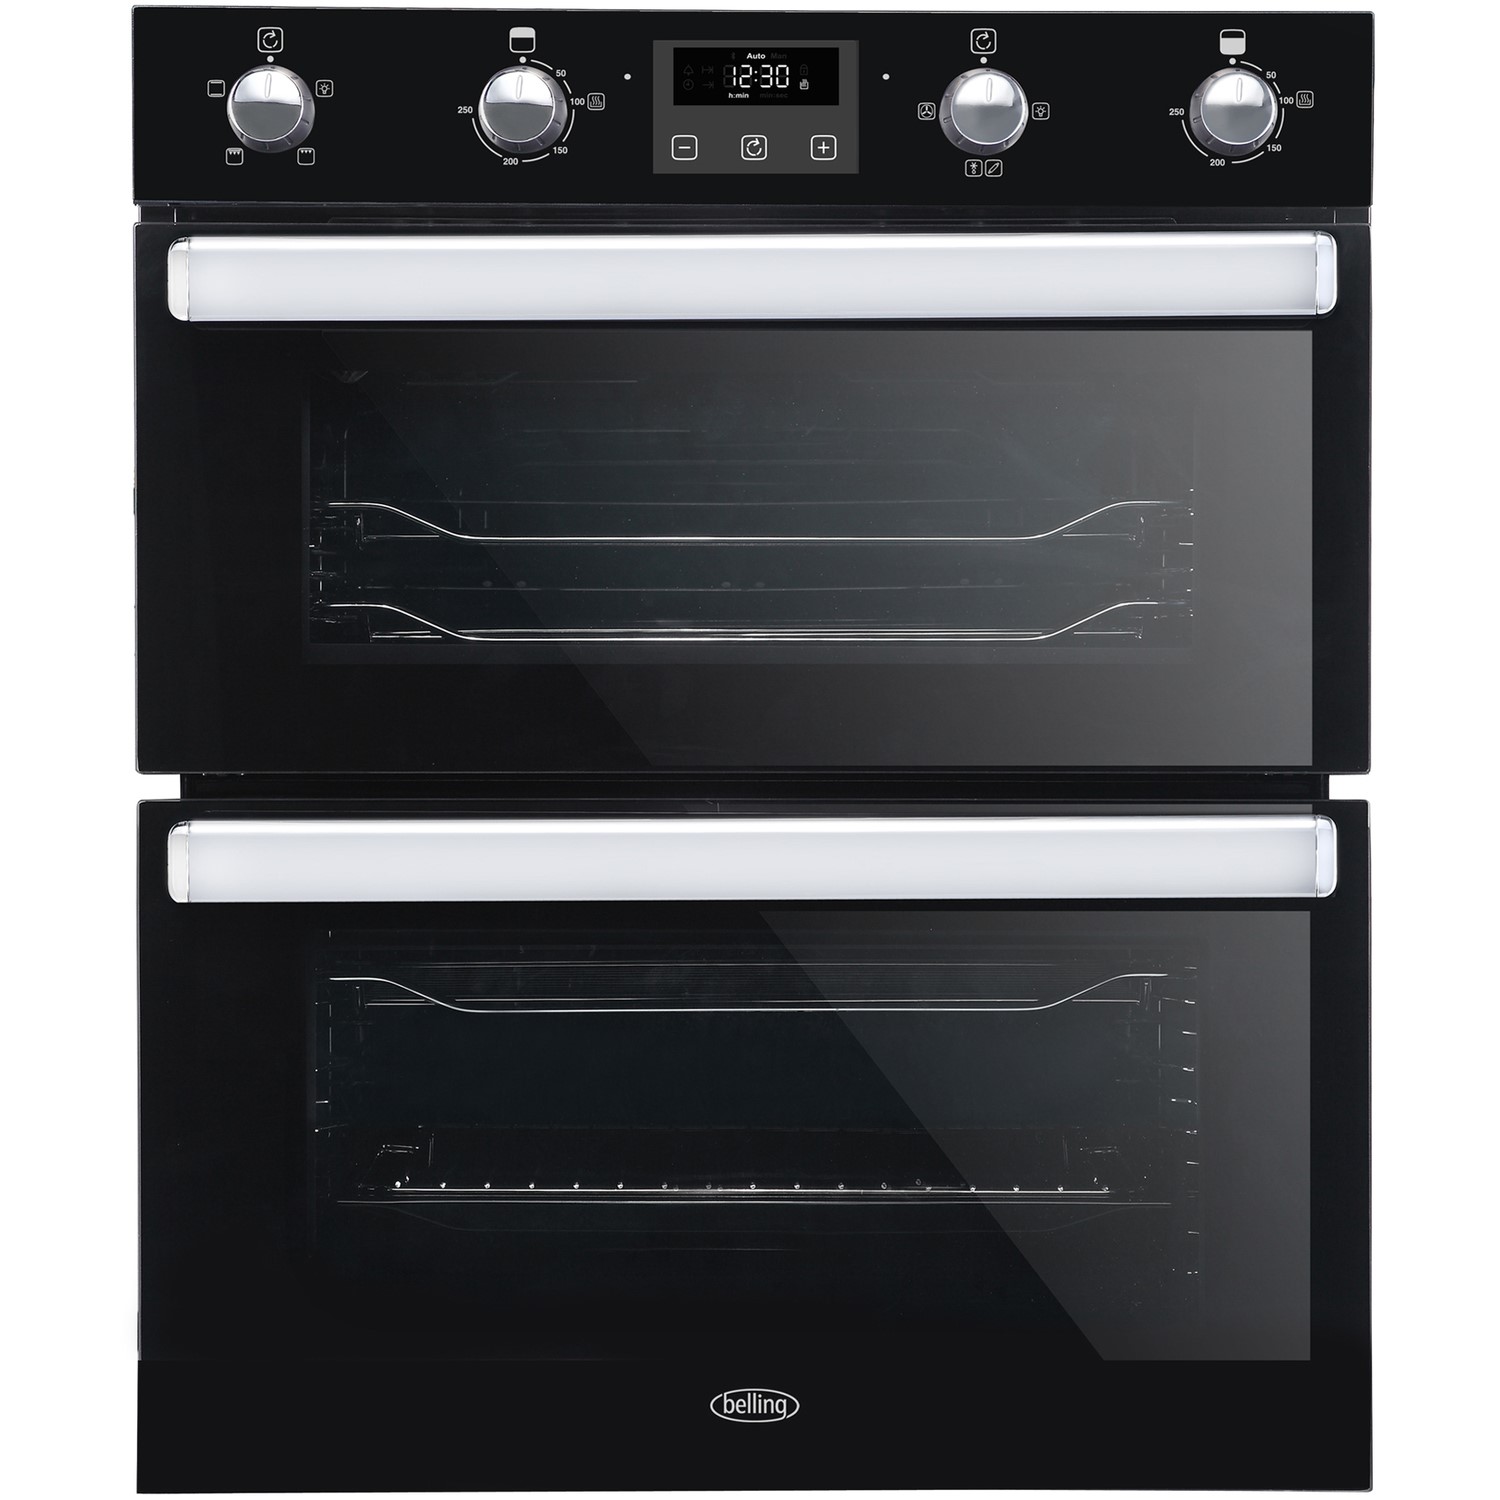 Belling BI702FPCT Built Under Double Oven with Catalytic Liners - Black